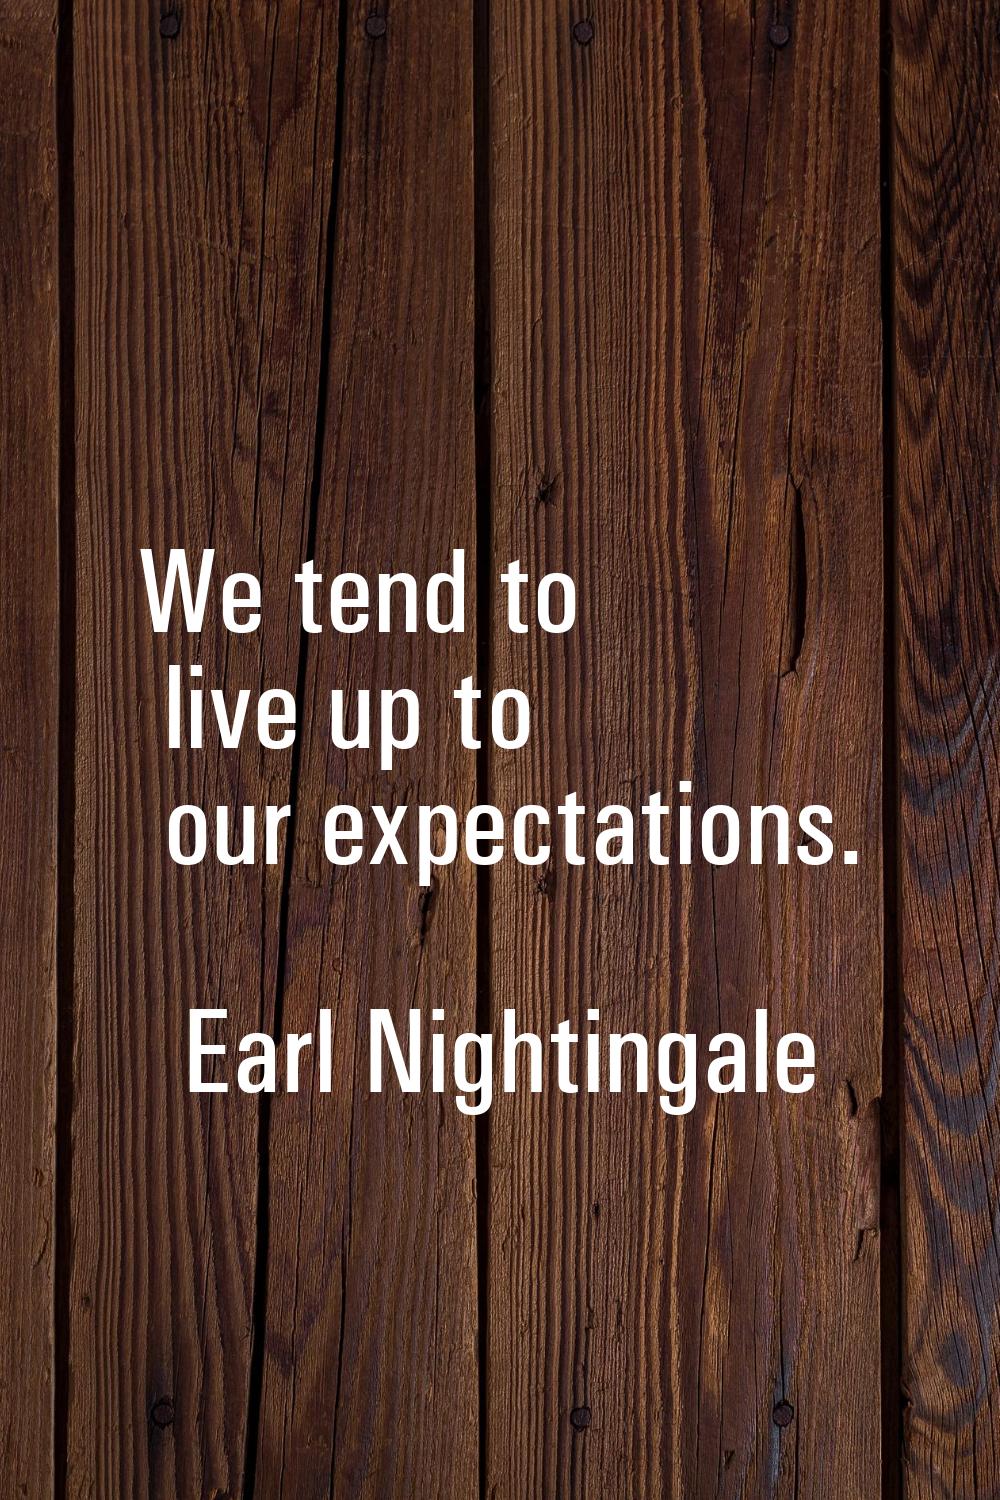 We tend to live up to our expectations.